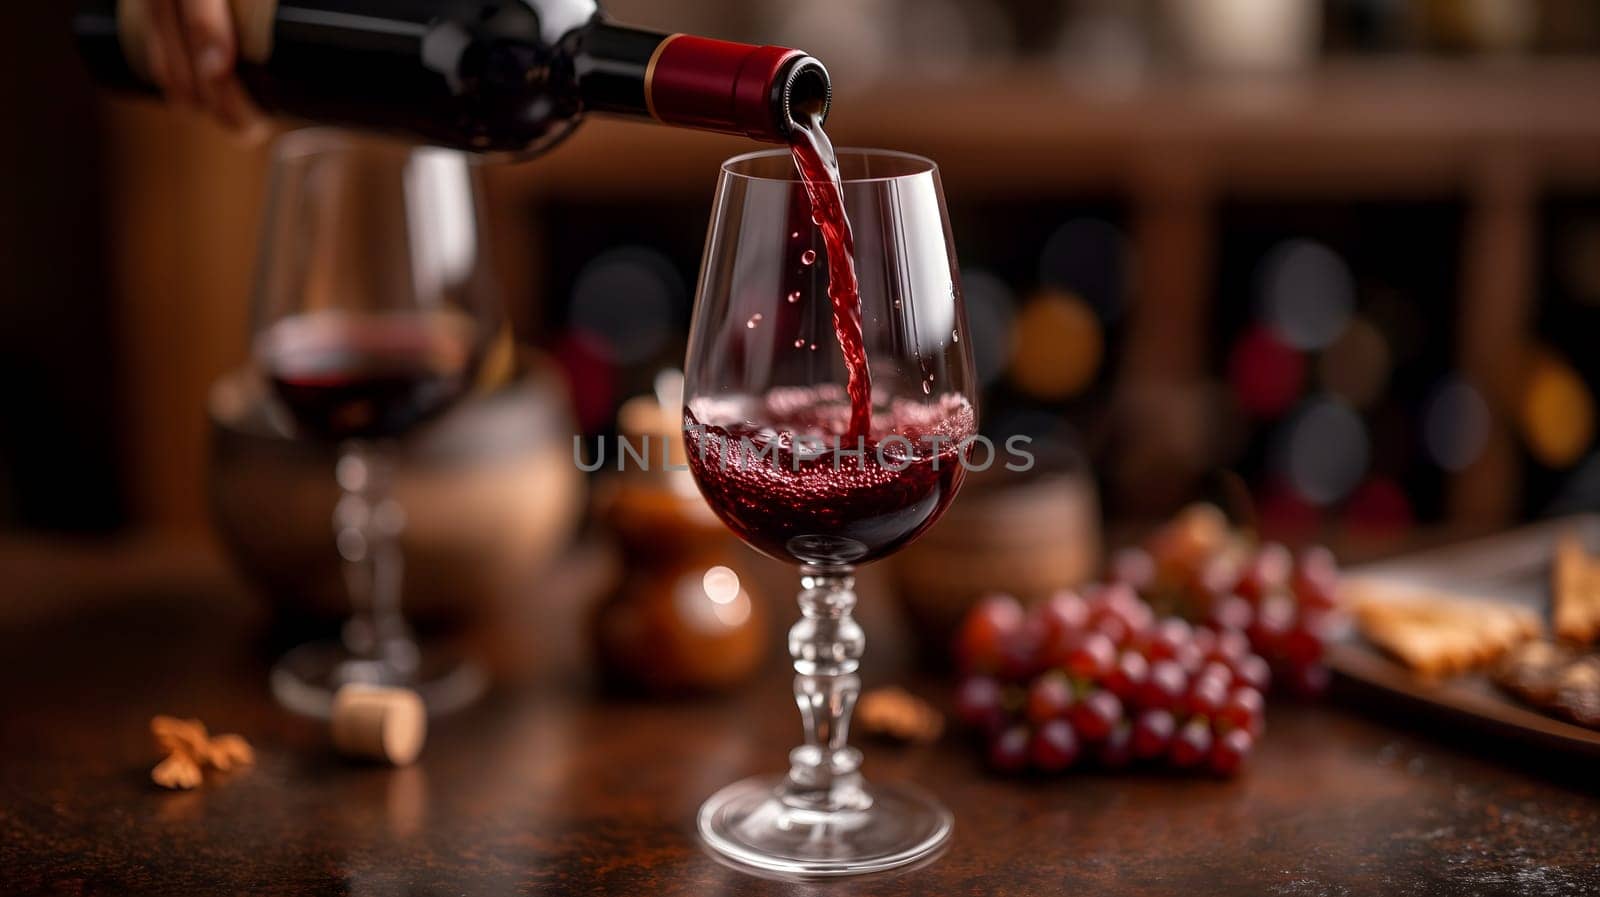 A wine bottle, with its elegant shape and deep red liquid inside, is being poured into a crystal glass, ready to be enjoyed during a romantic dinner. by z1b